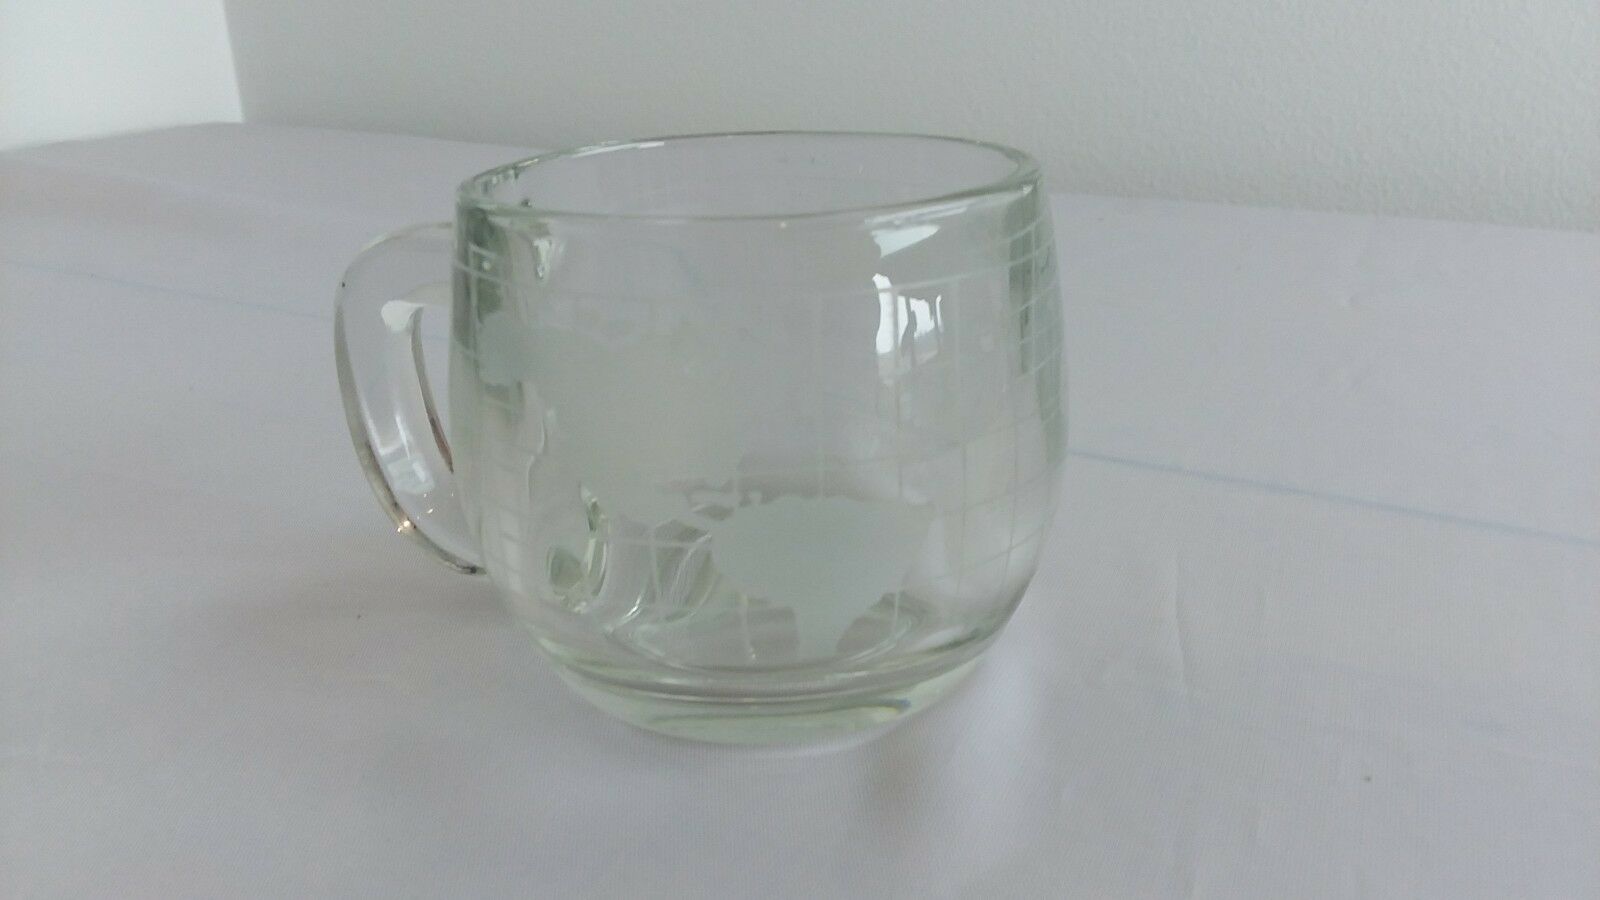 Nestle Nescafe Glass World Clear Etched Glass Mug Coffee Cup Vintage Collectible